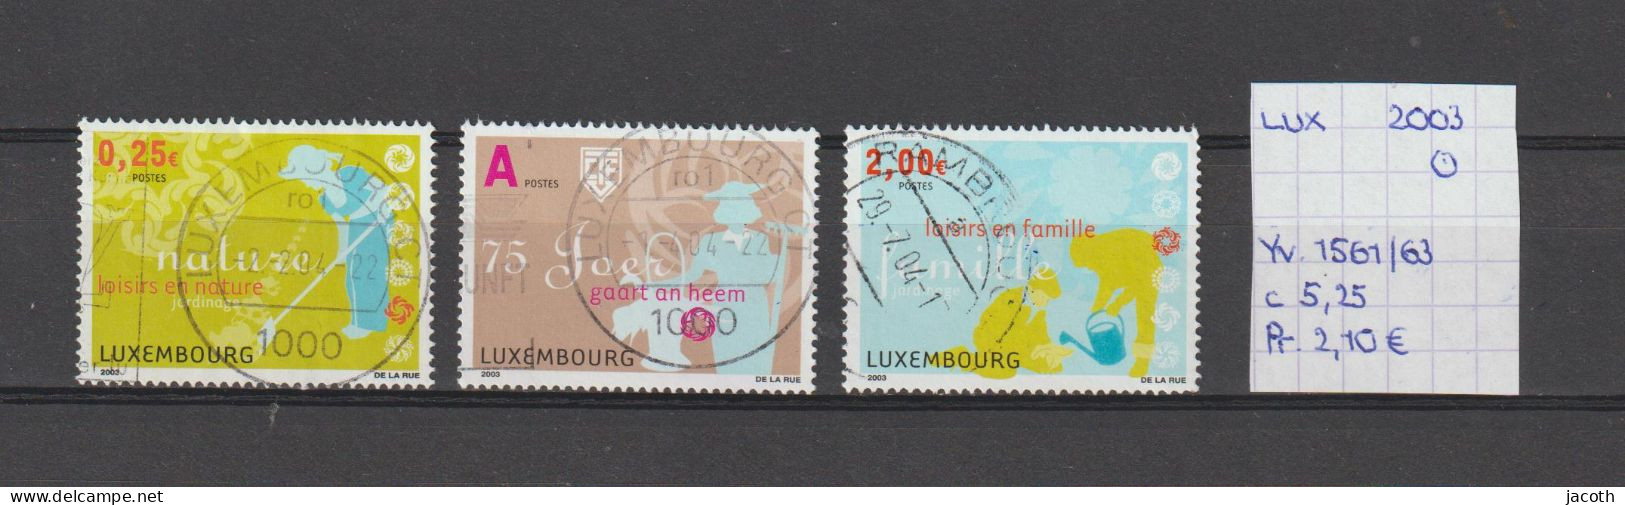 (TJ) Luxembourg 2003 - YT 1561/63 (gest./obl./used) - Usati